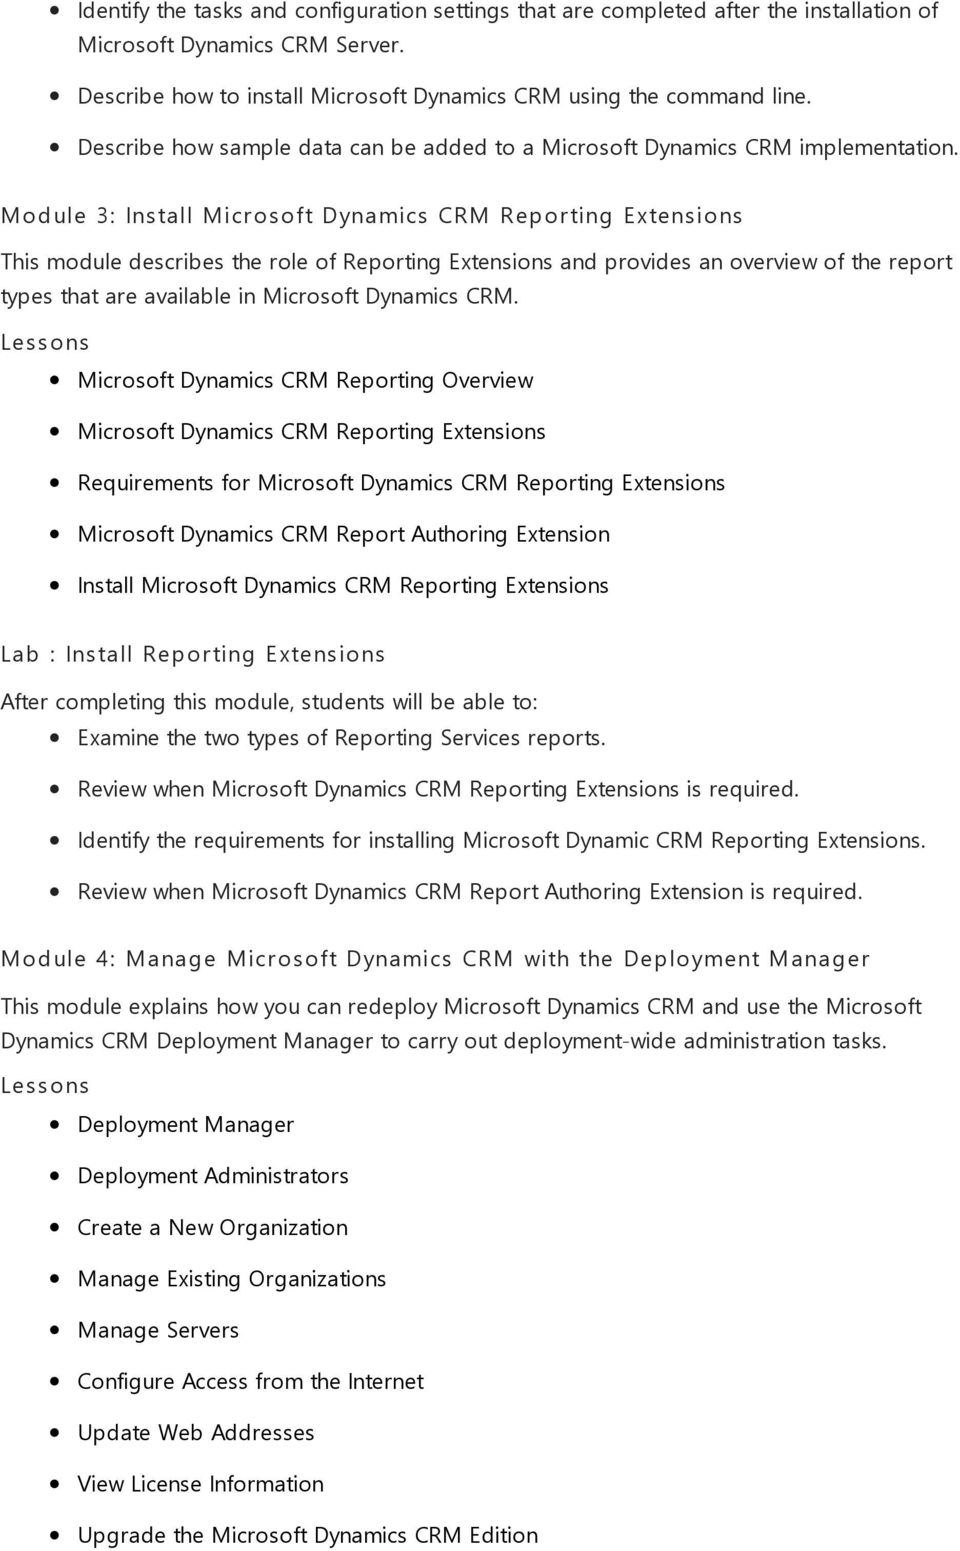 Module 3: Install Microsoft Dynamics CRM Reporting Extensions This module describes the role of Reporting Extensions and provides an overview of the report types that are available in Microsoft